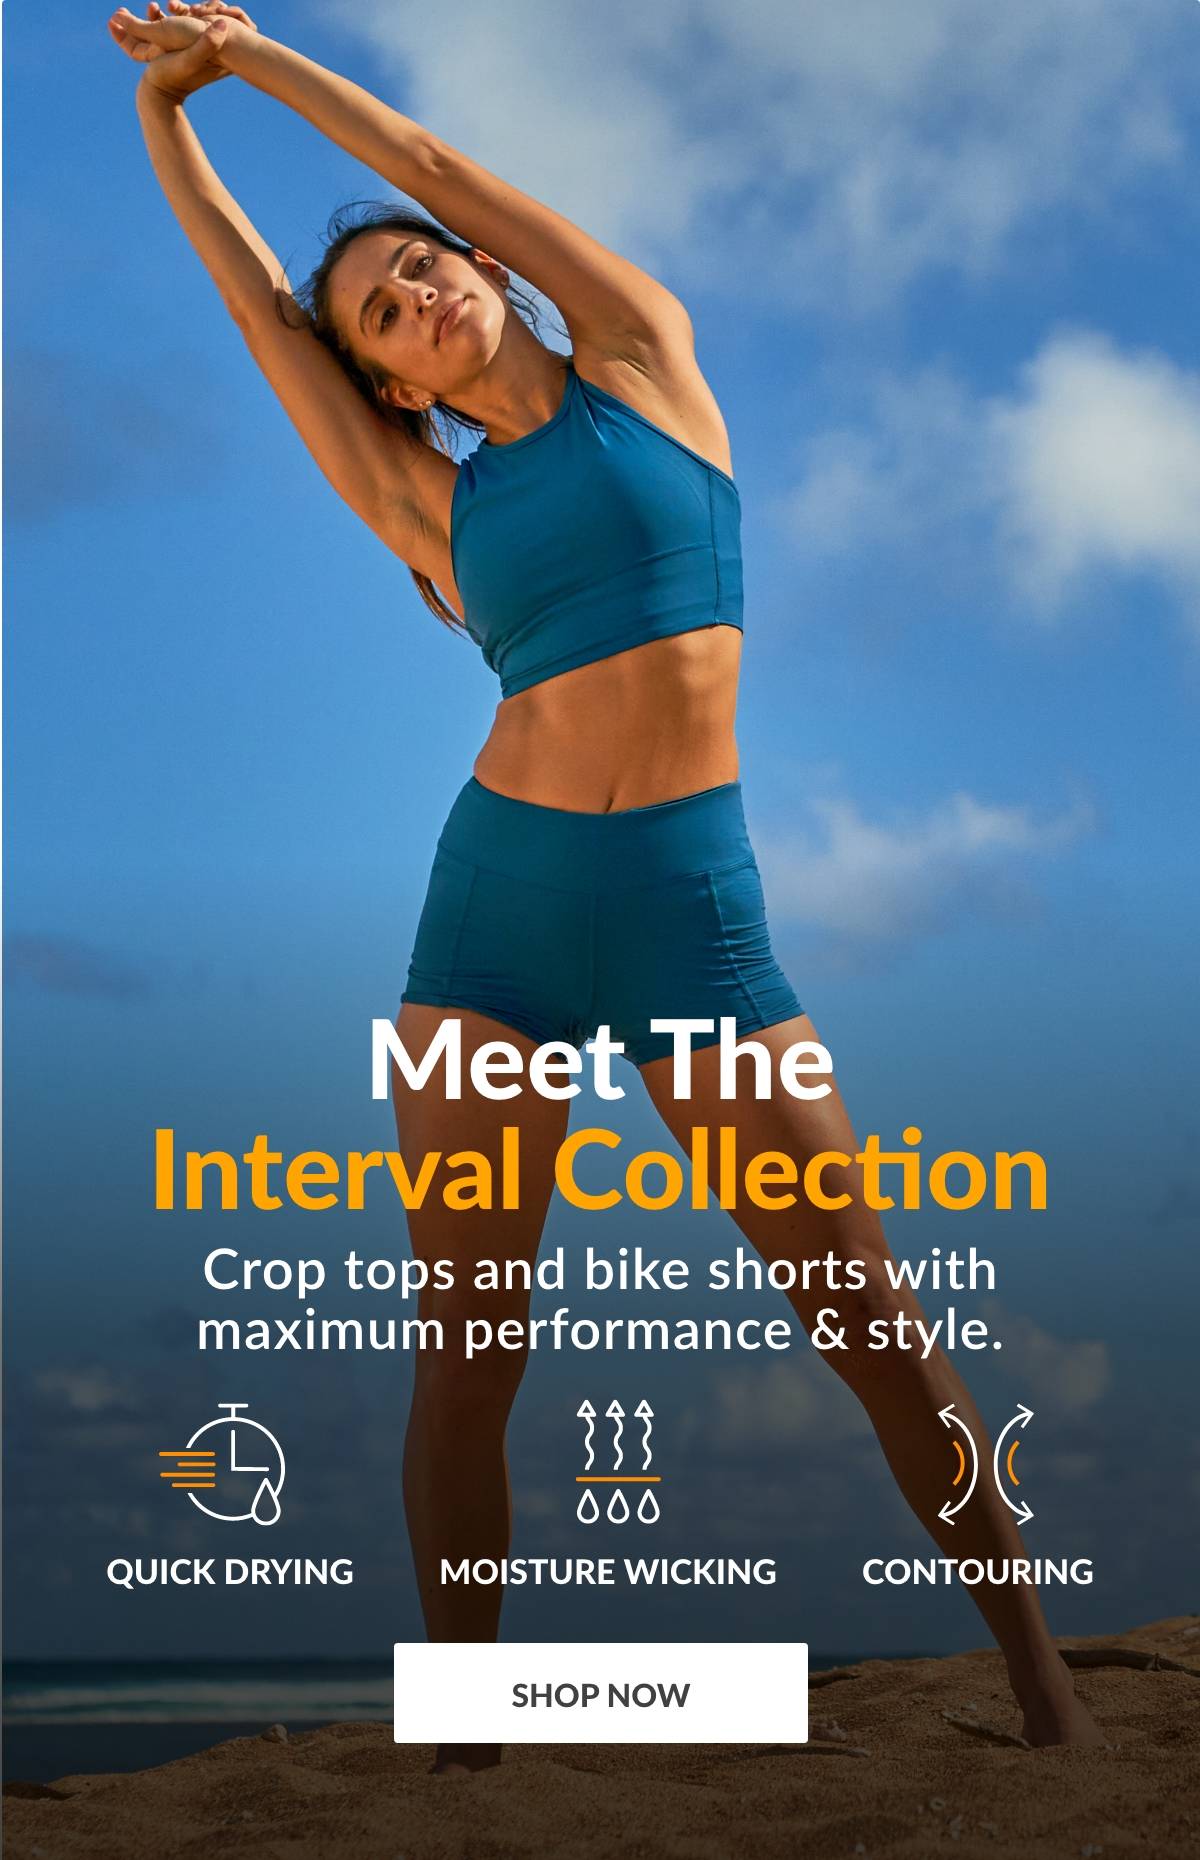 Meet the Interval Collection. Crop tops &  bike shorts with maximum performance and style. Quick Drying. Moisture Wicking. Contouring. SHOP NOW